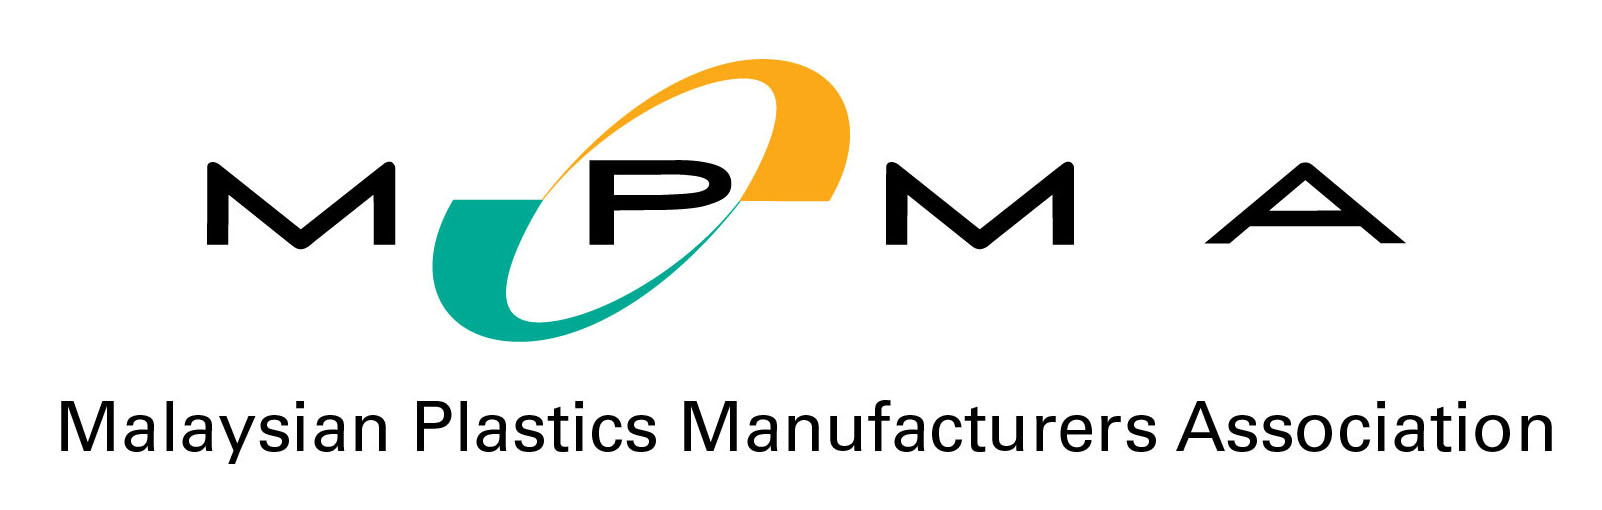 Logo MPMA colour with name in full 1